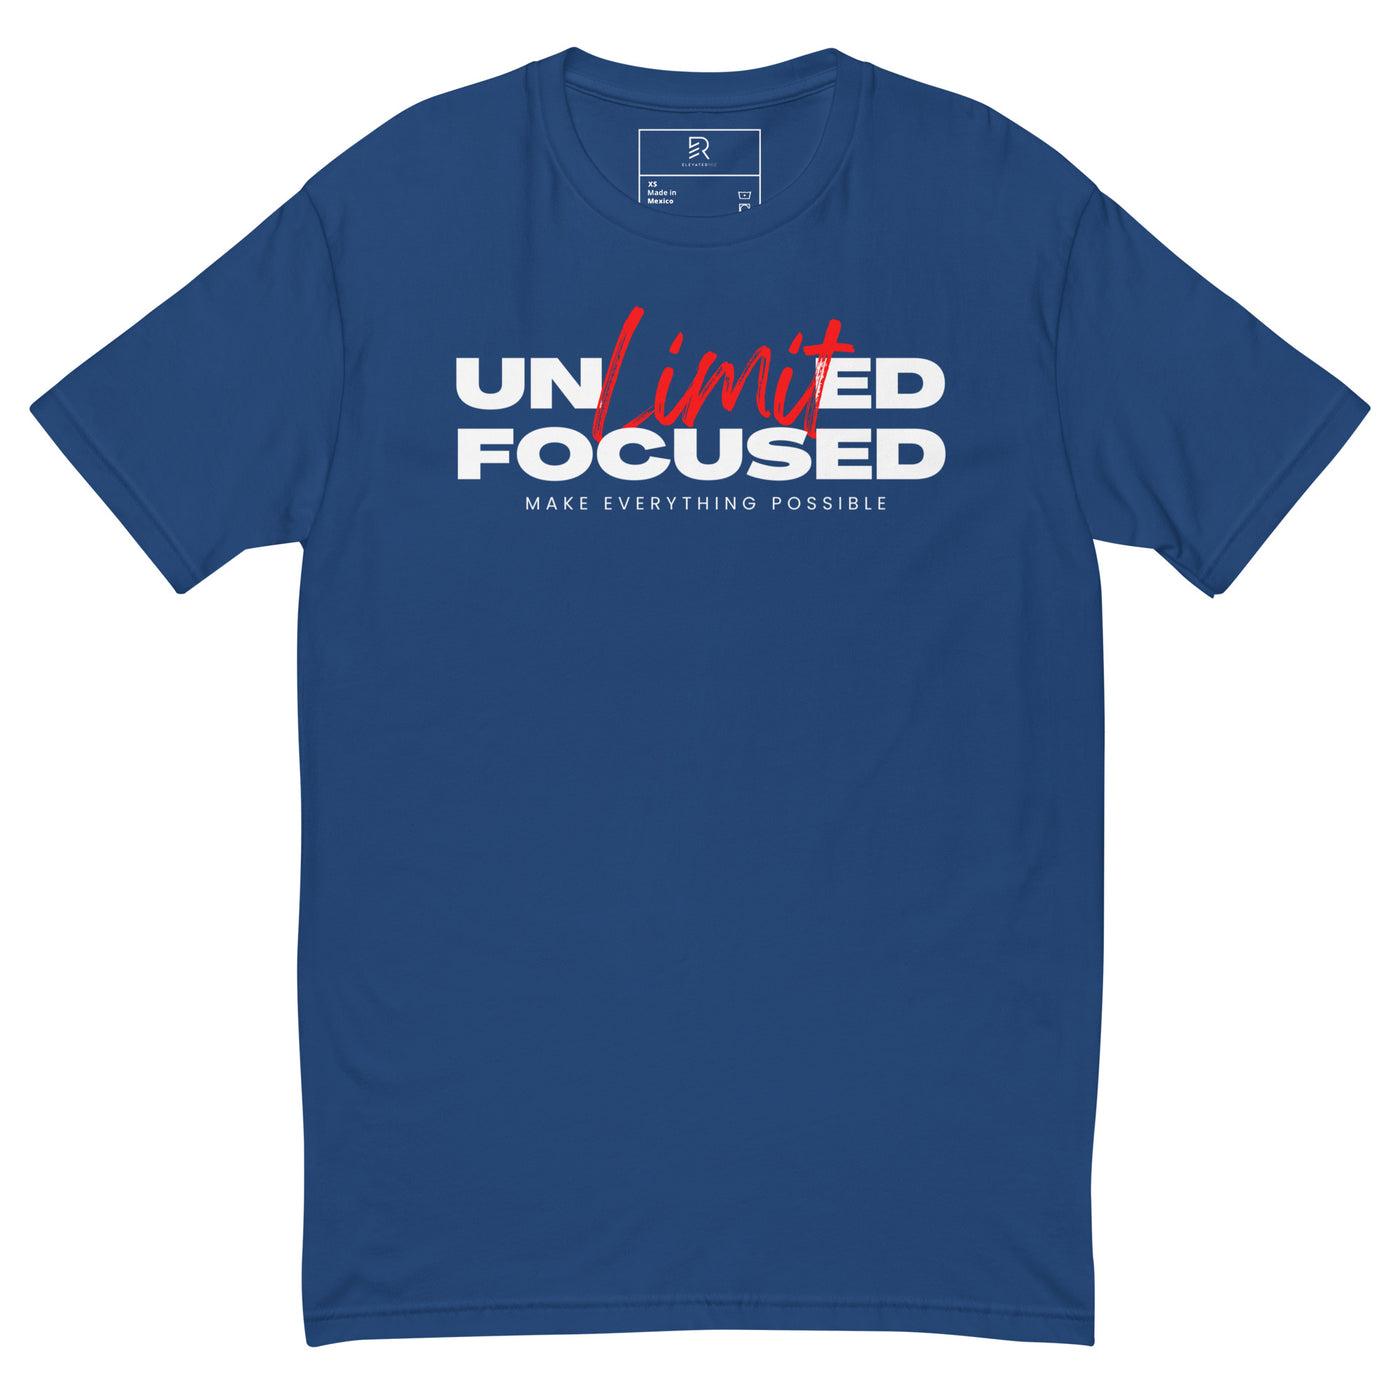 Men's Fitted Royal Blue T-shirt - Unlimited Focus